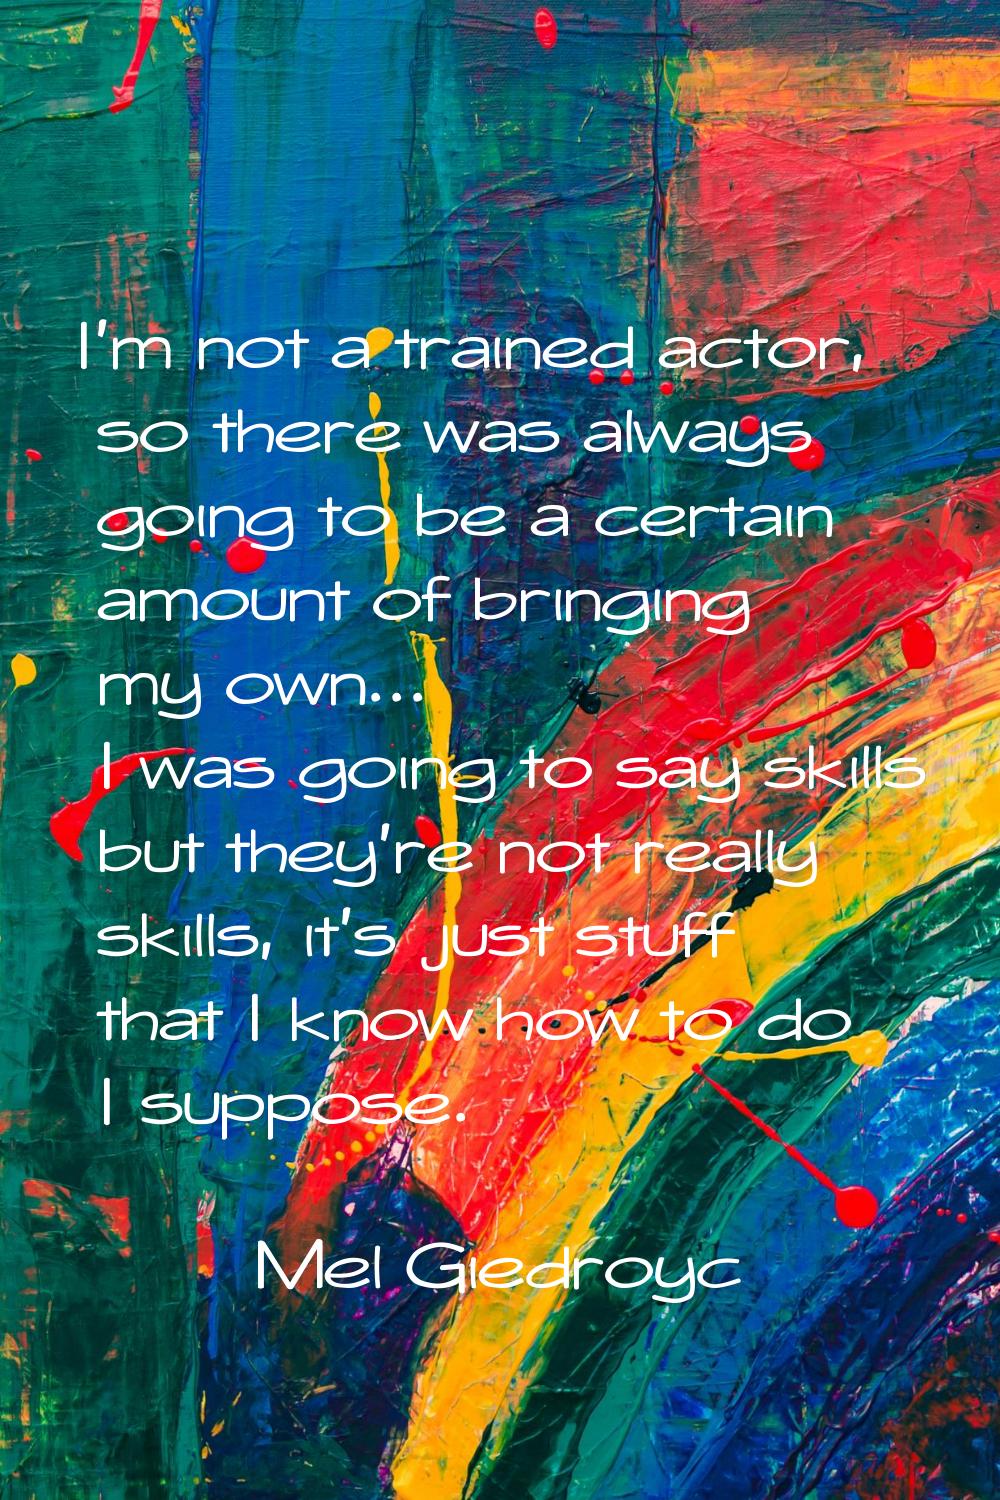 I'm not a trained actor, so there was always going to be a certain amount of bringing my own... I w